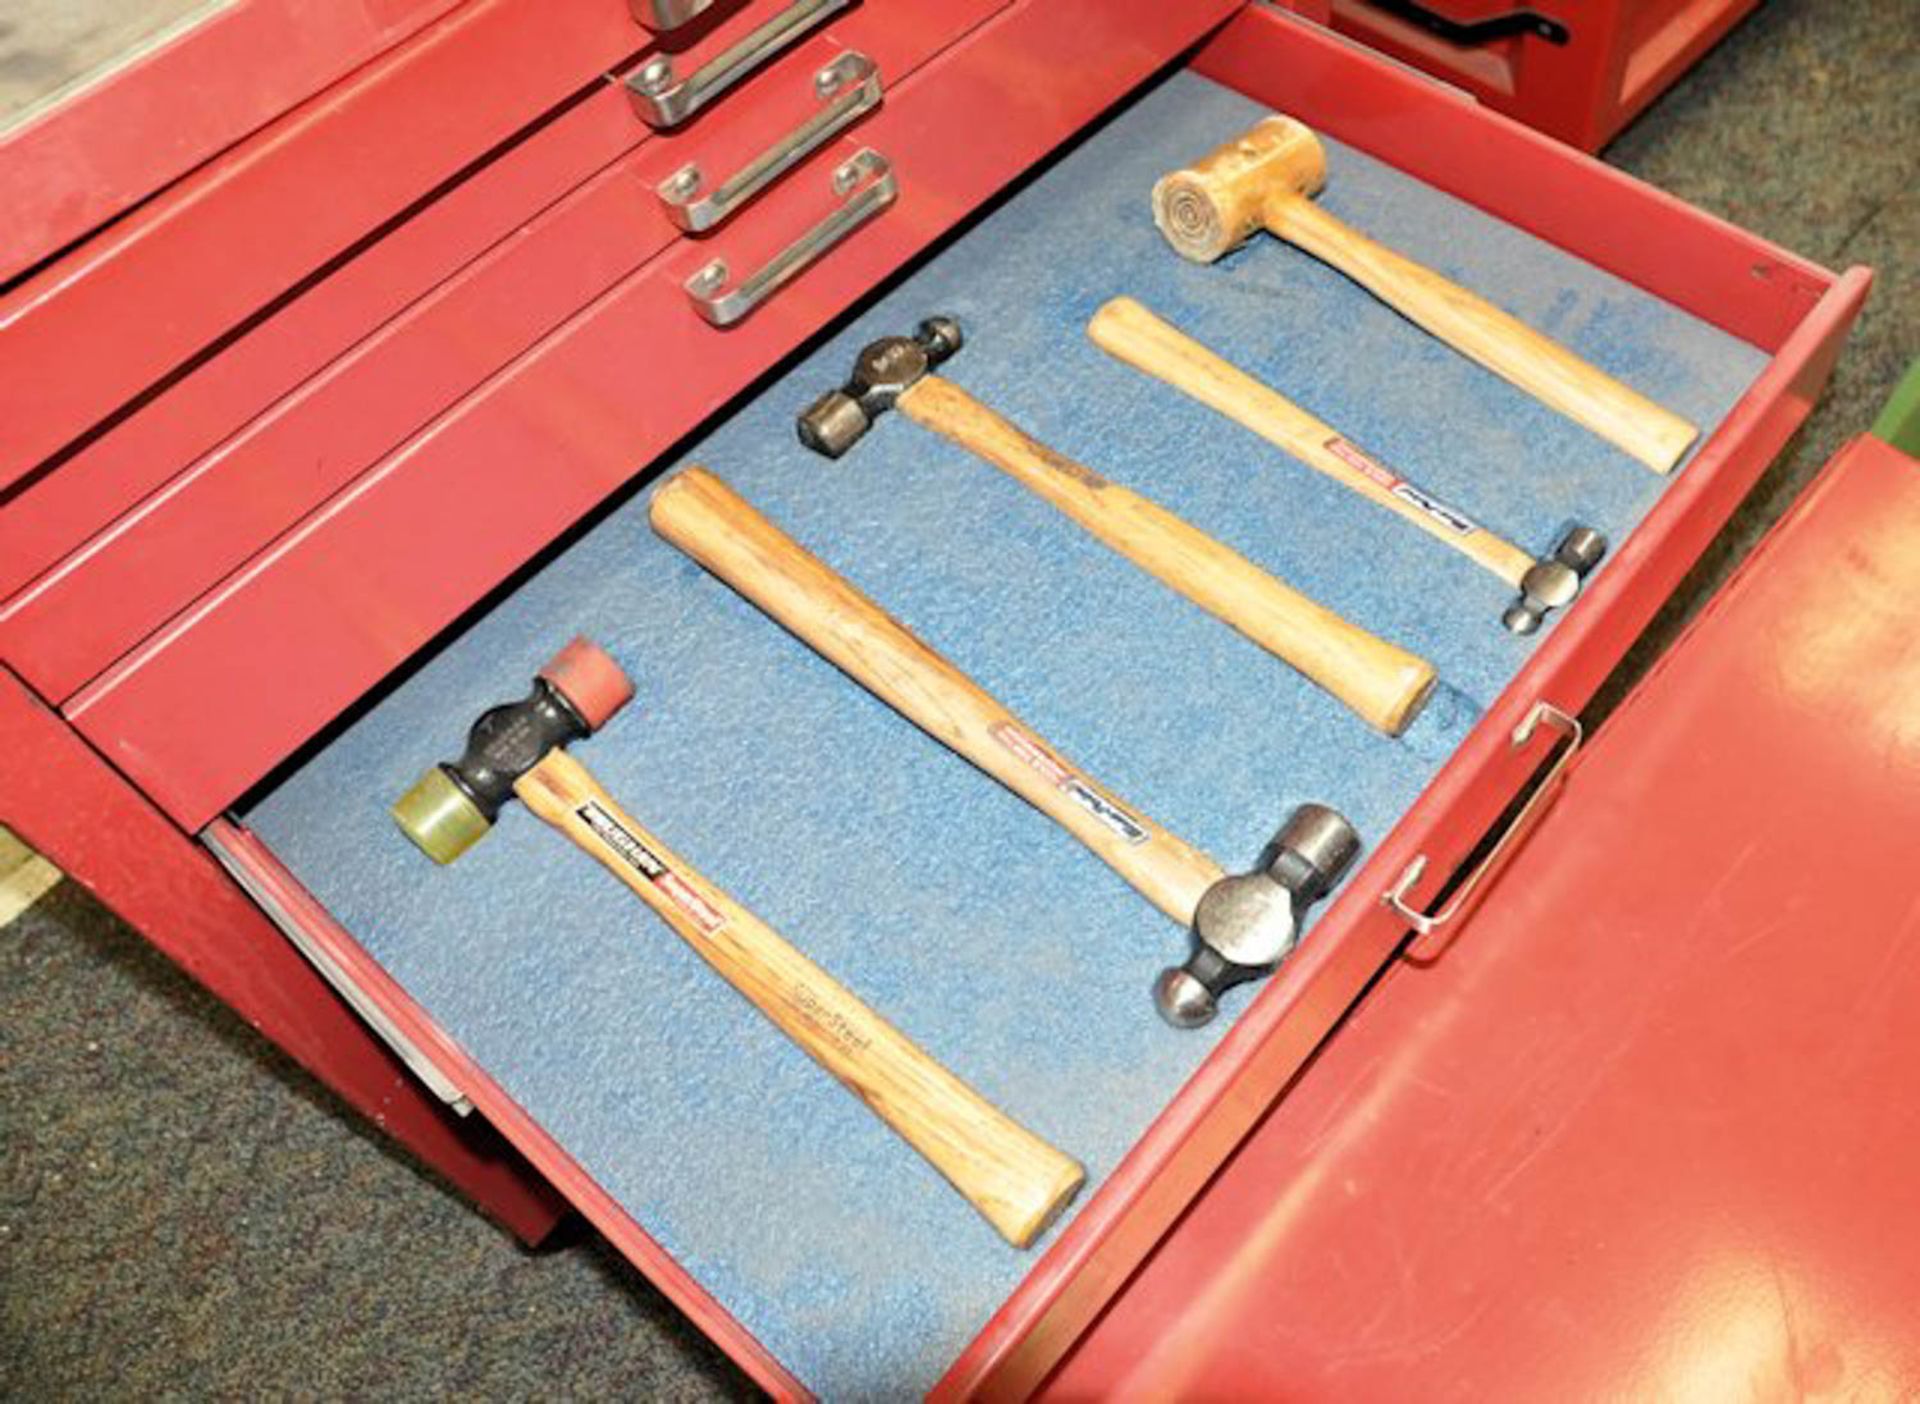 STACK-ON 2-PIECE ROLLING TOOLBOX WITH HAND TOOL CONTENTS - Image 9 of 10